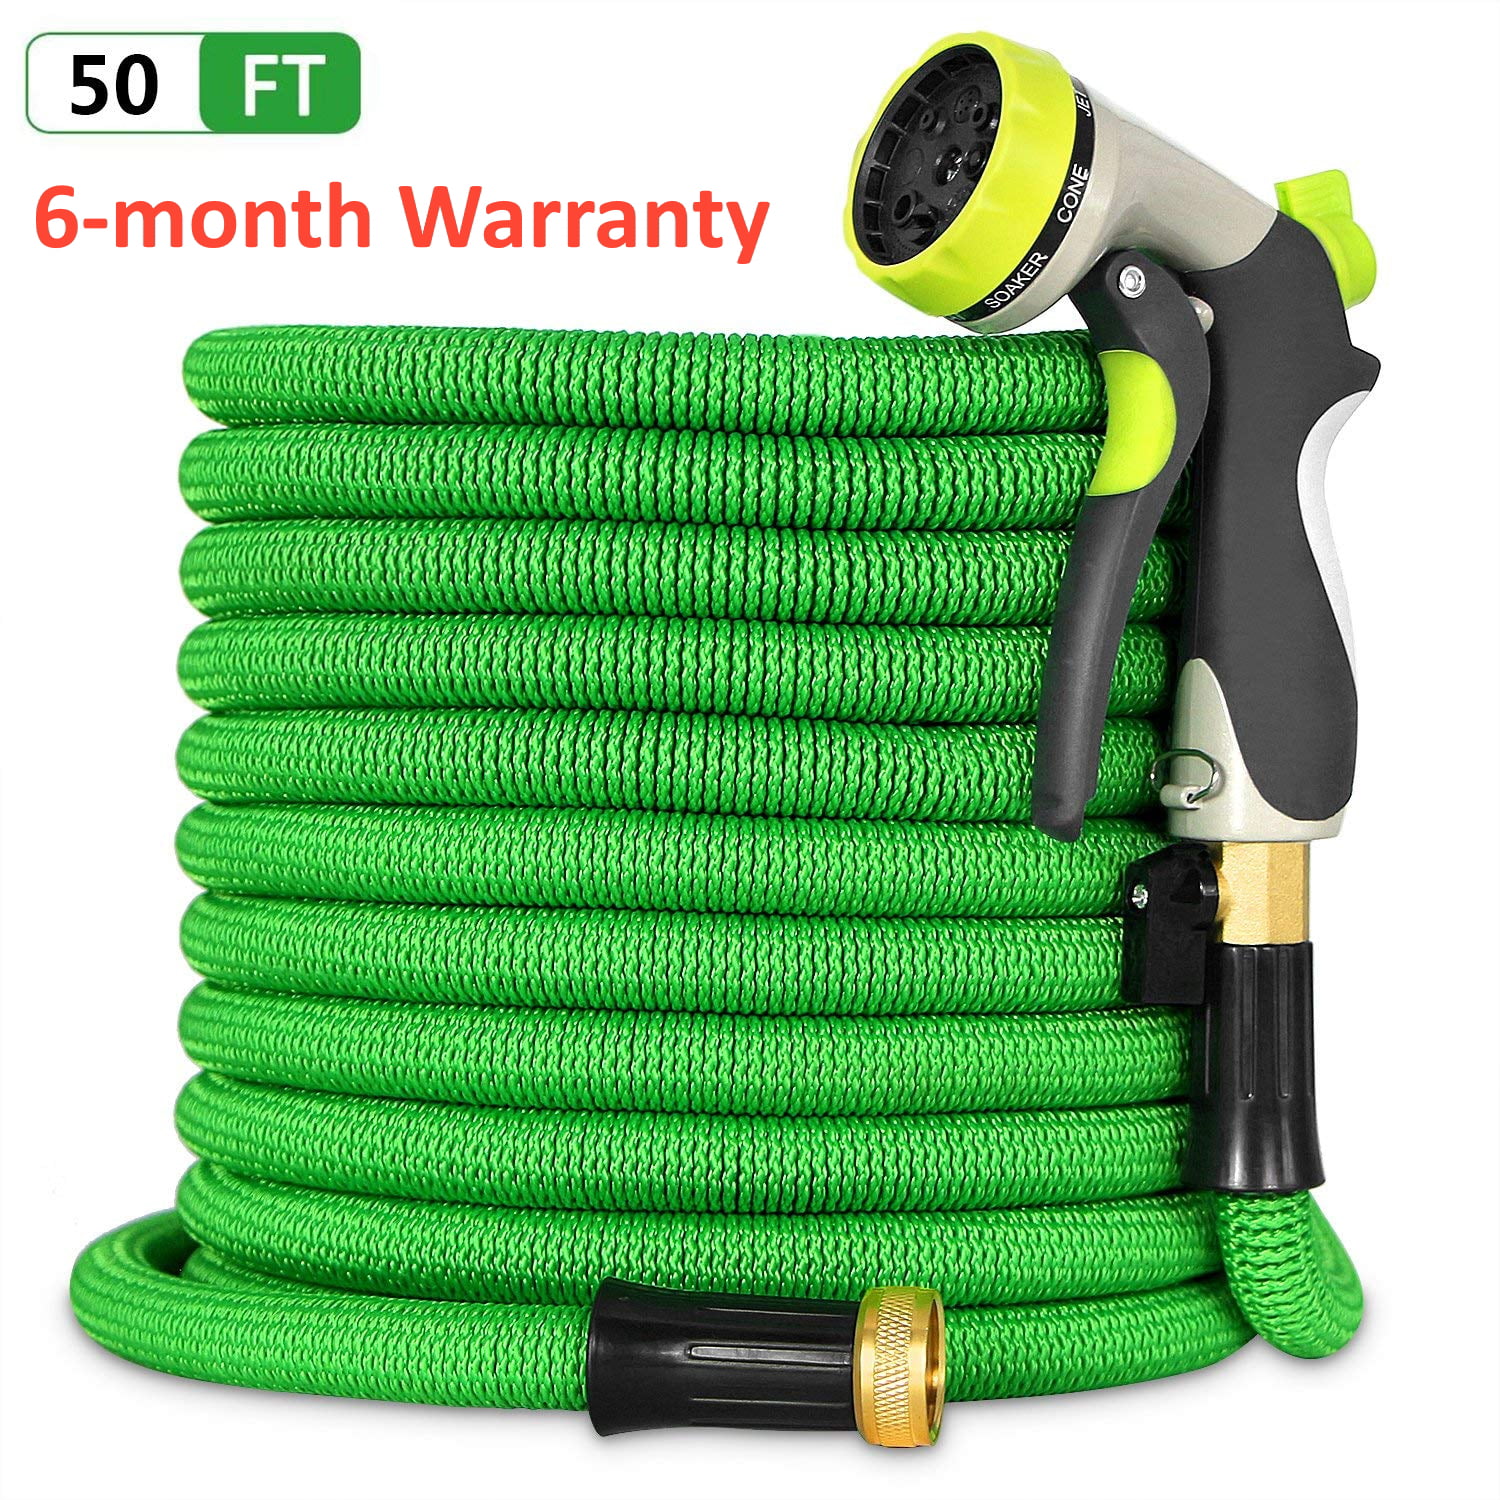 JUSTRITE 14415 Hose Attachment Flexible 5/8" Hose with Ground Funnel Safety New 